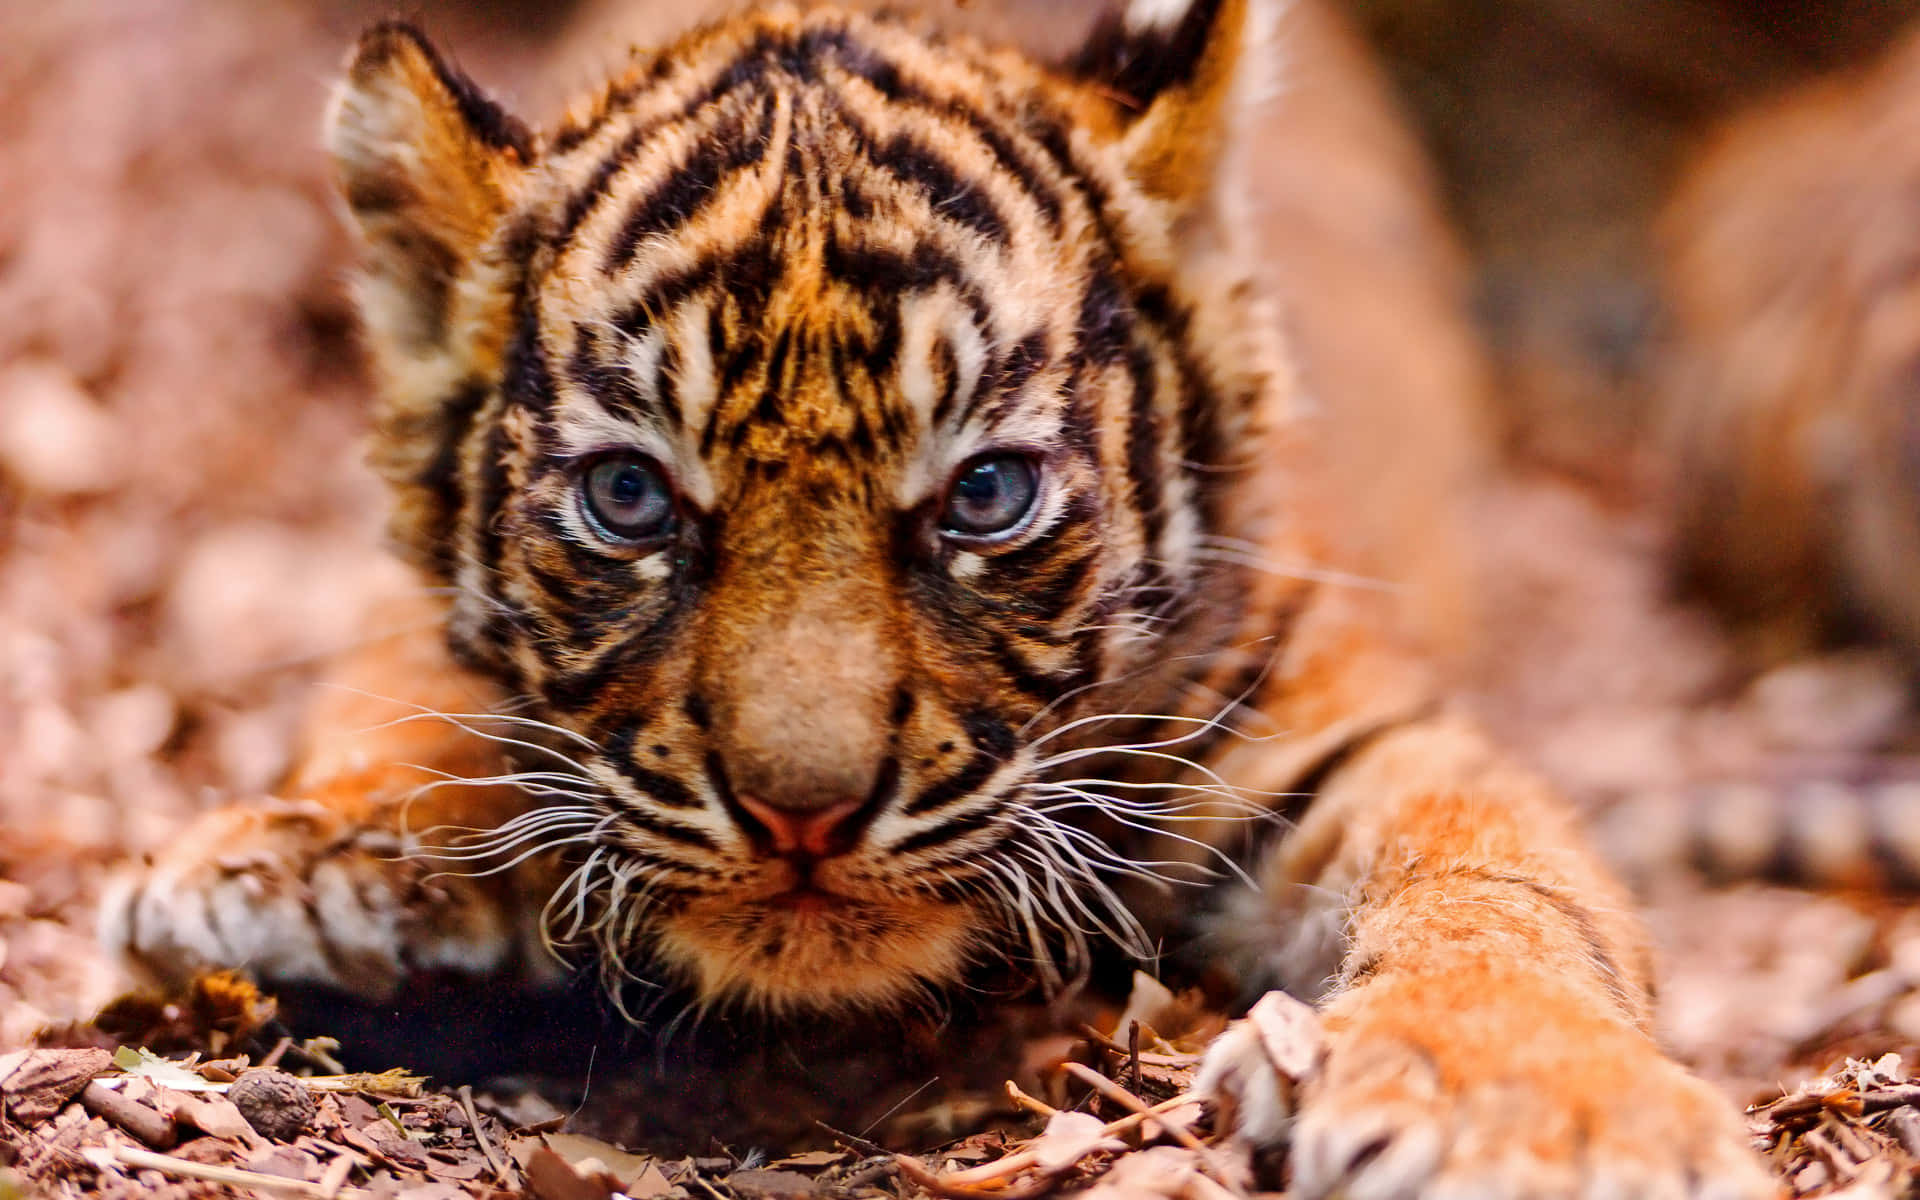 Look at Those Amazing Baby Tiger Eyes